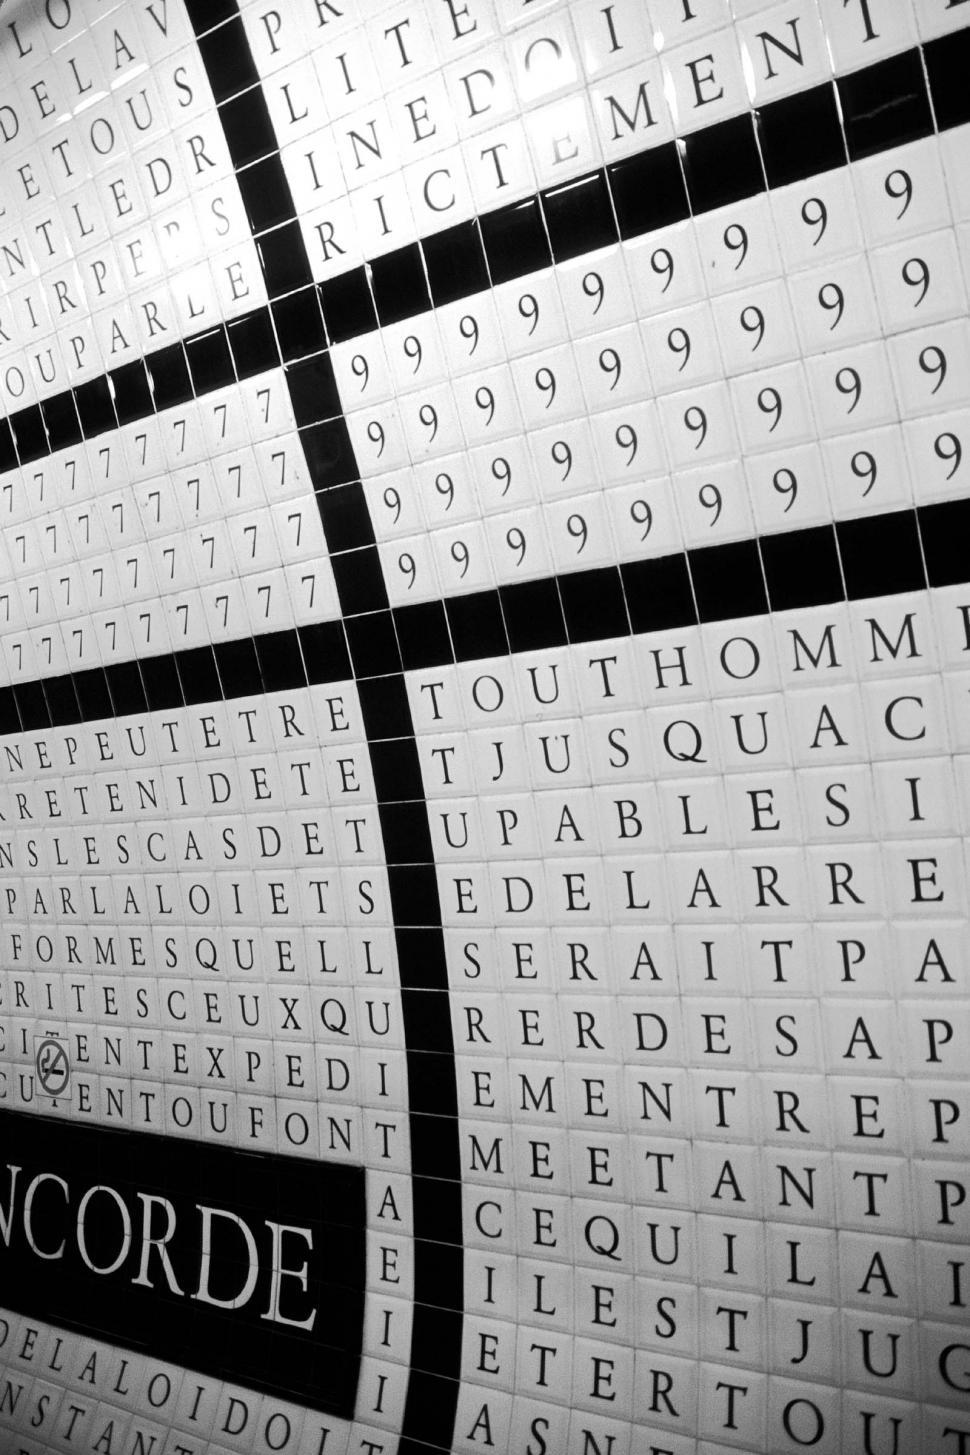 Free Image of france metro station concorde text writing tiles letters black and white walls french tiled subway transportation europe european paris public art Universal Declaration of Human tunnel 